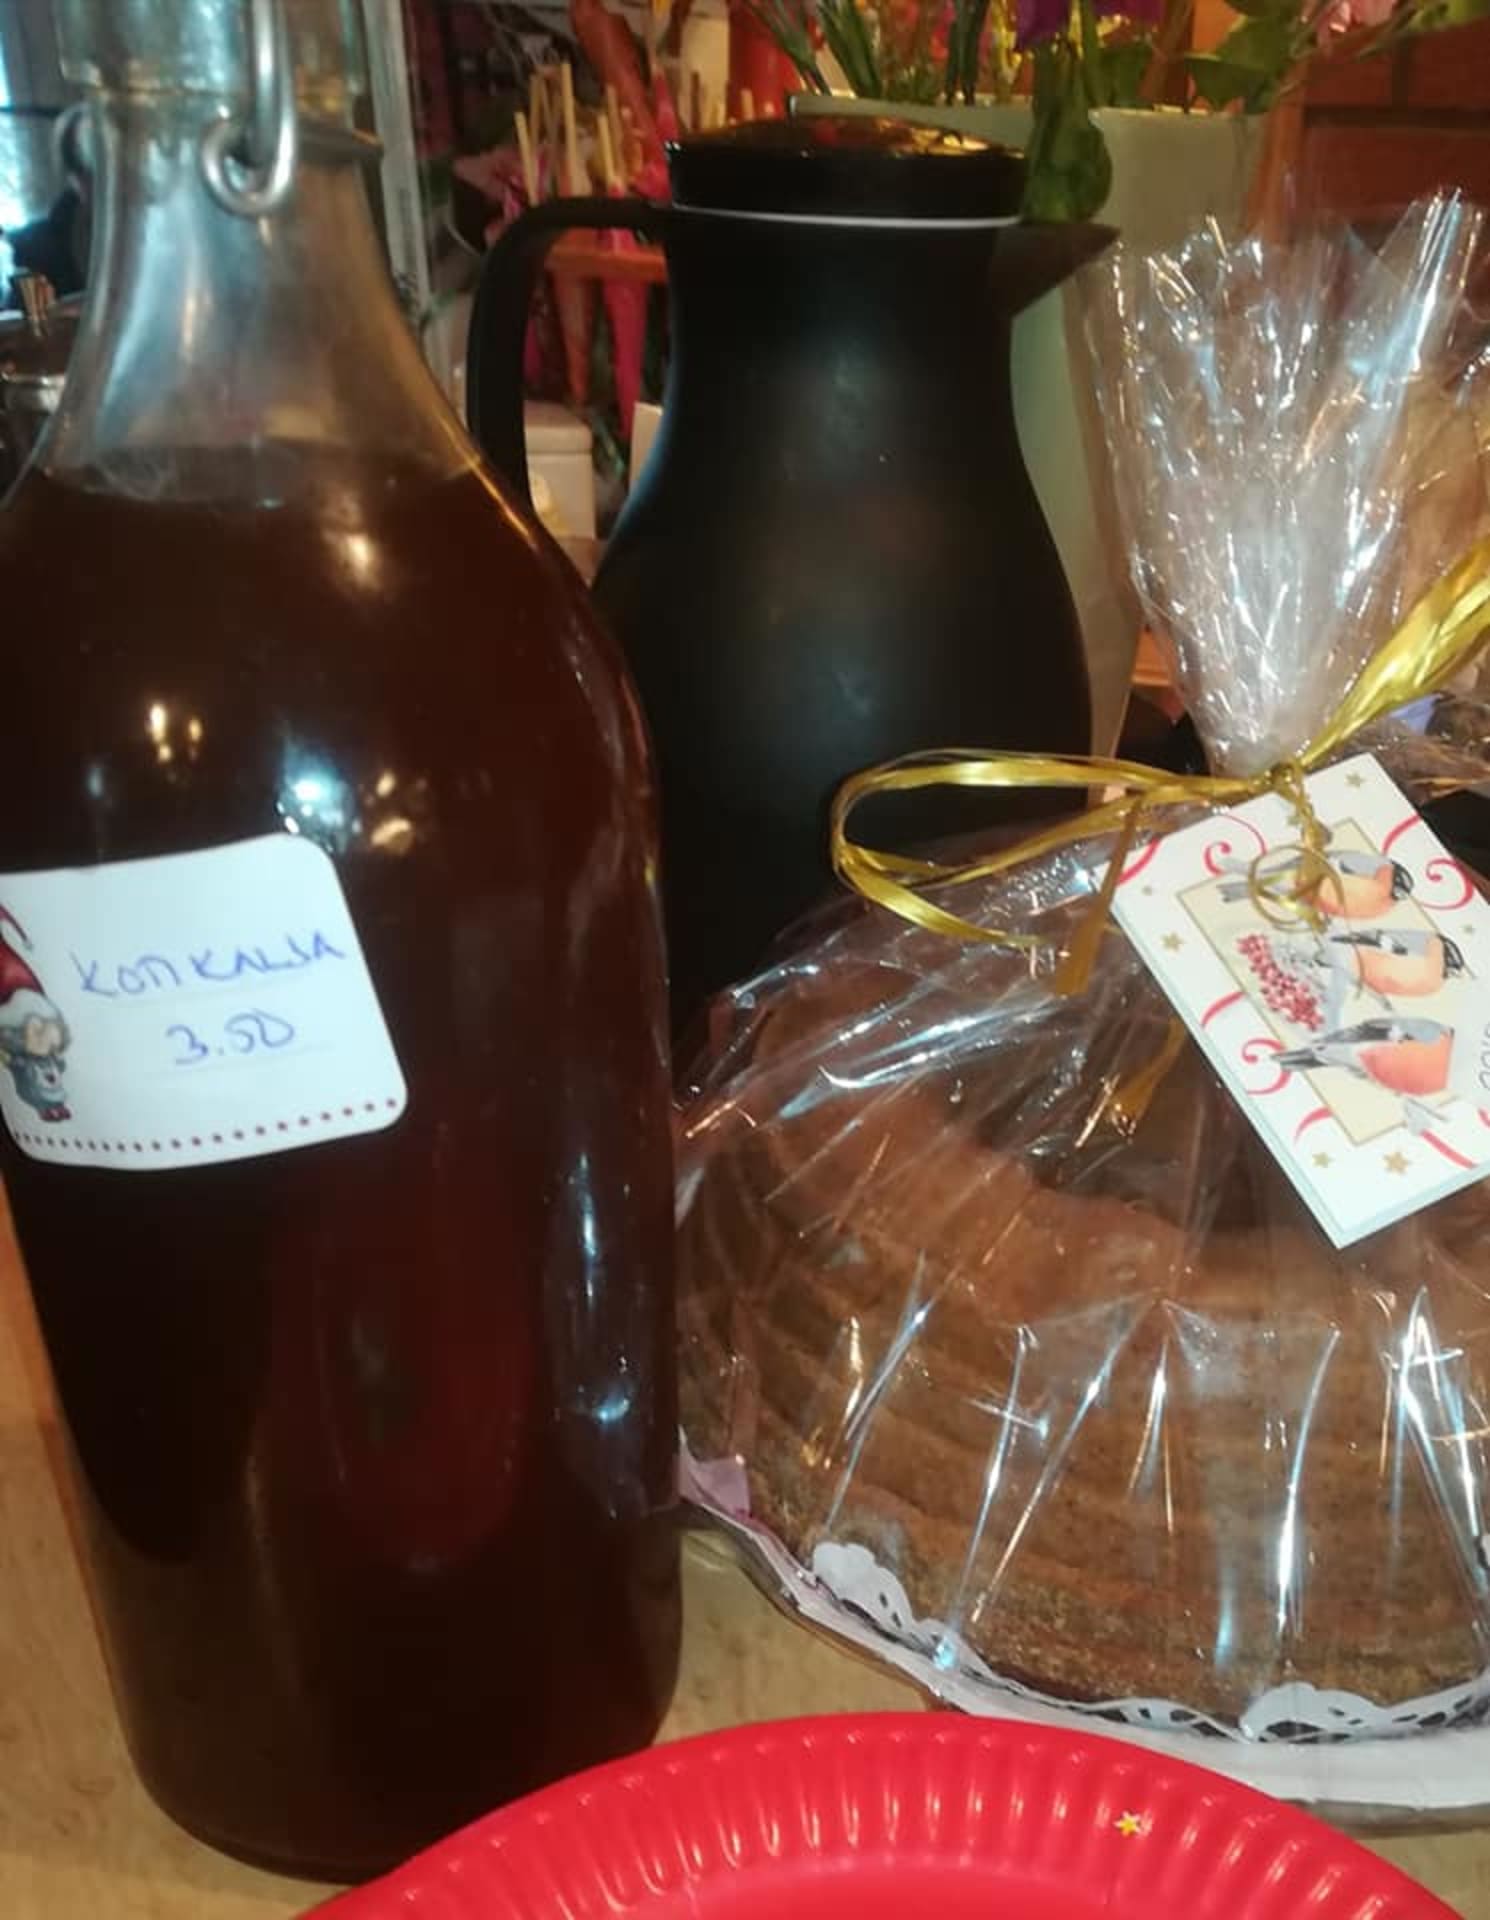 Home-made beer and cakes